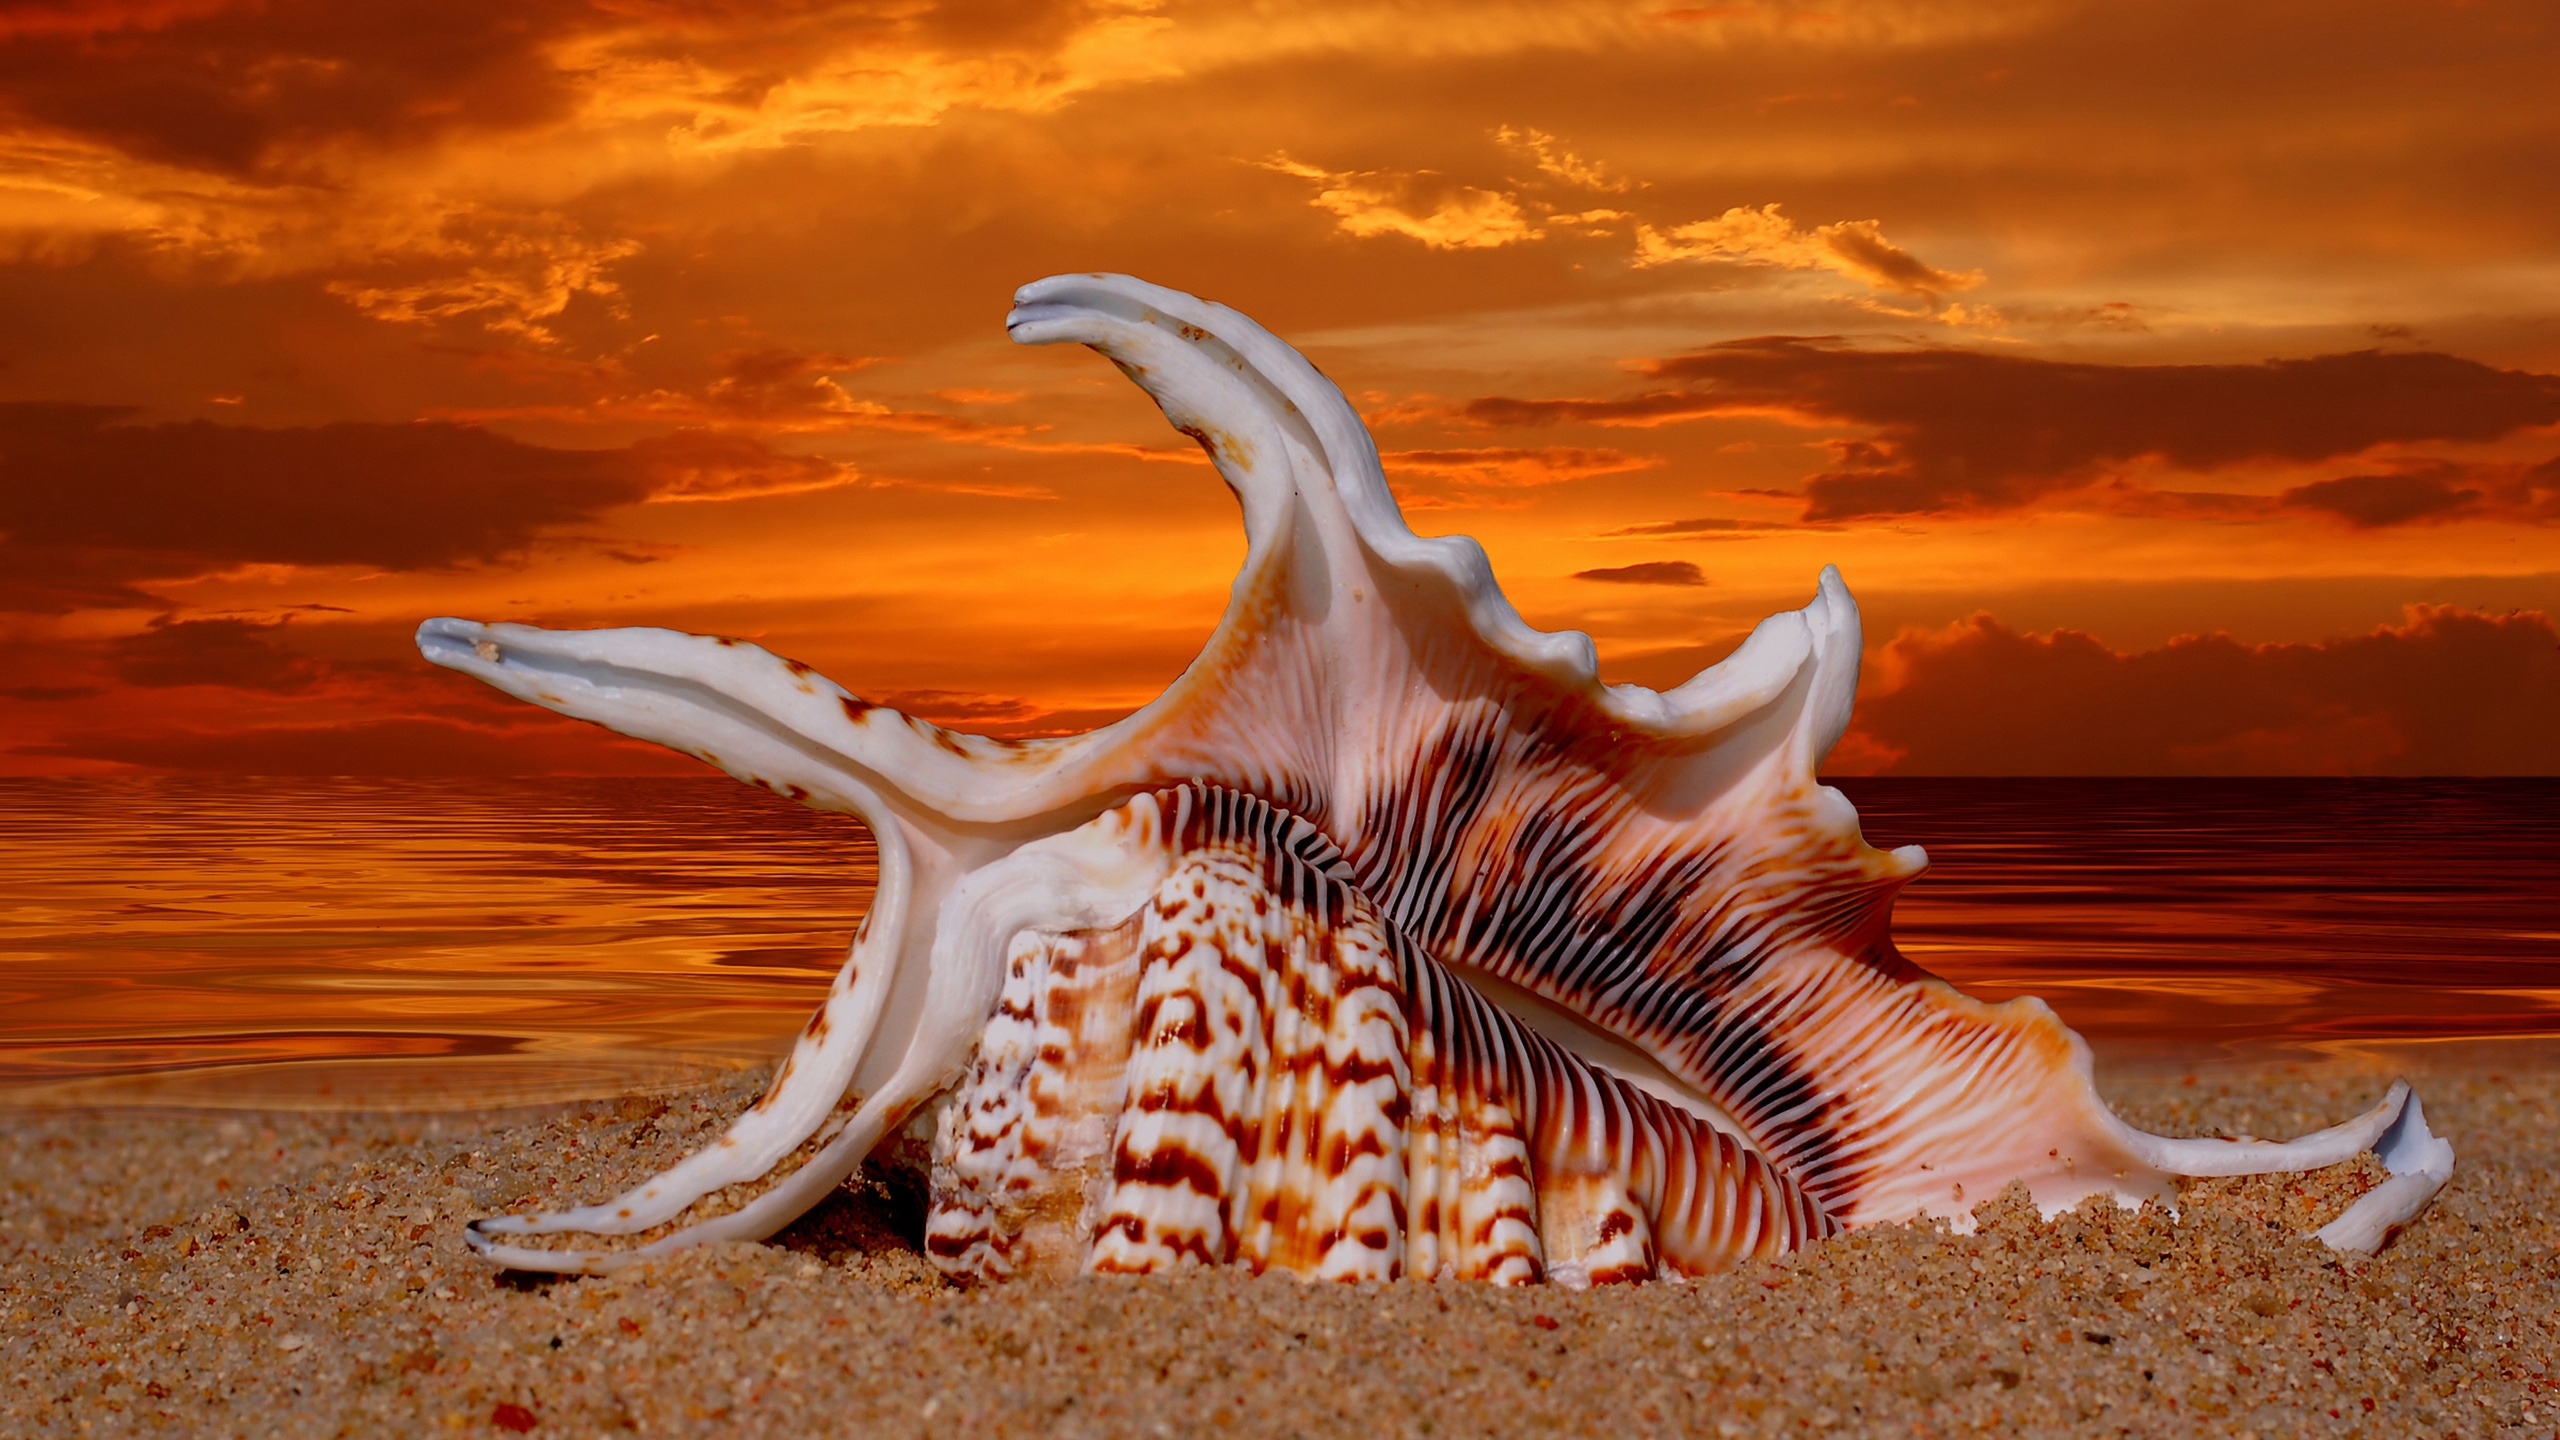 Beautiful Sunset Shell for 2560x1440 HDTV resolution